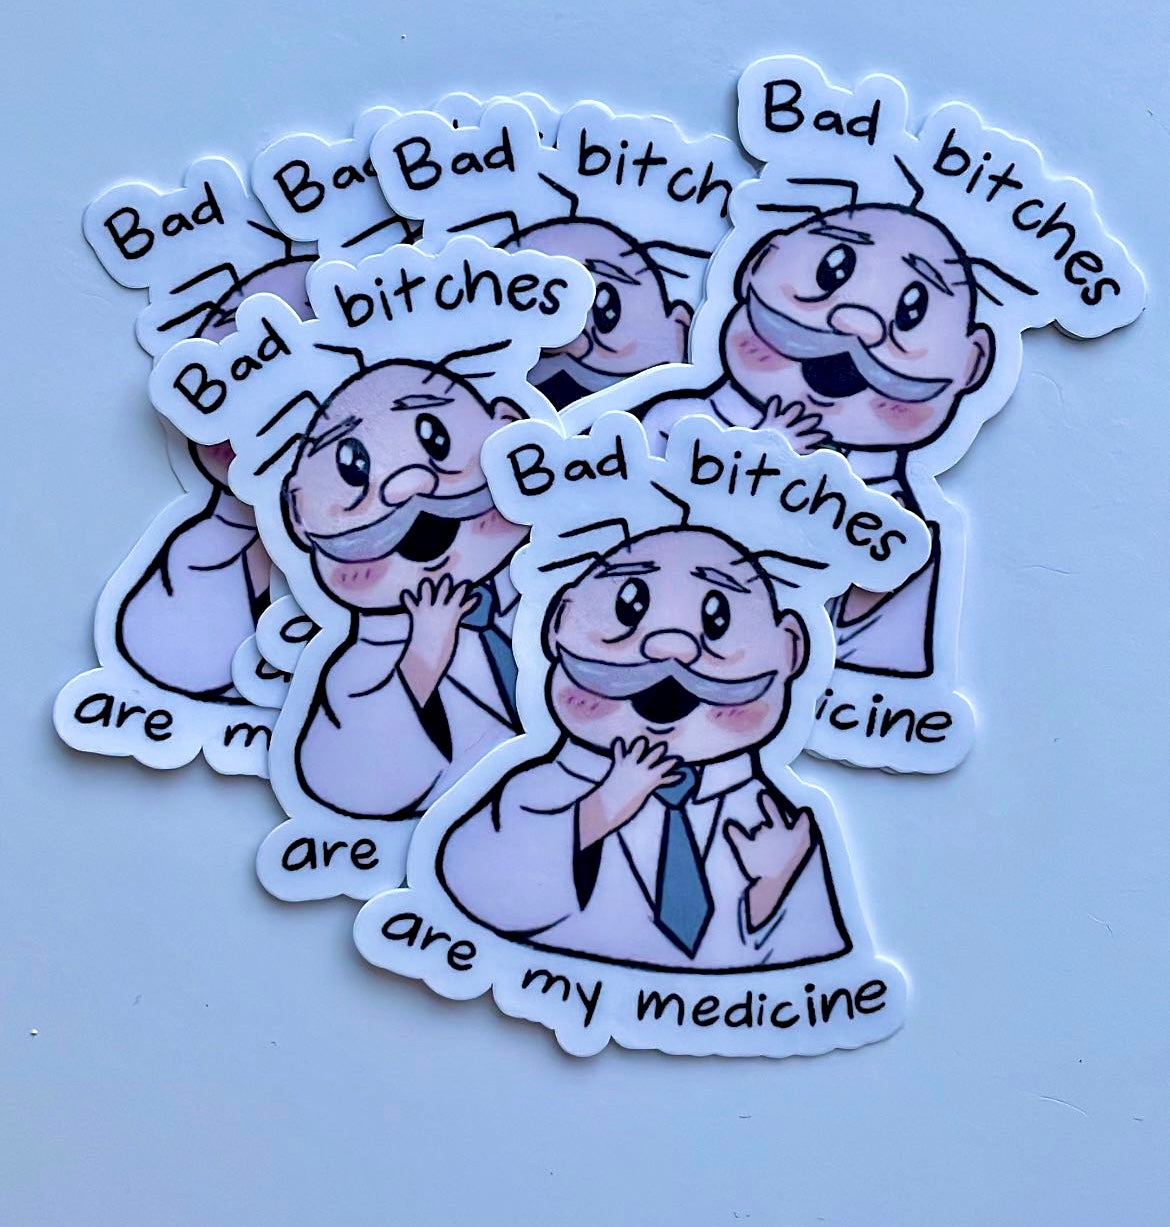 Dr. Simi stickers